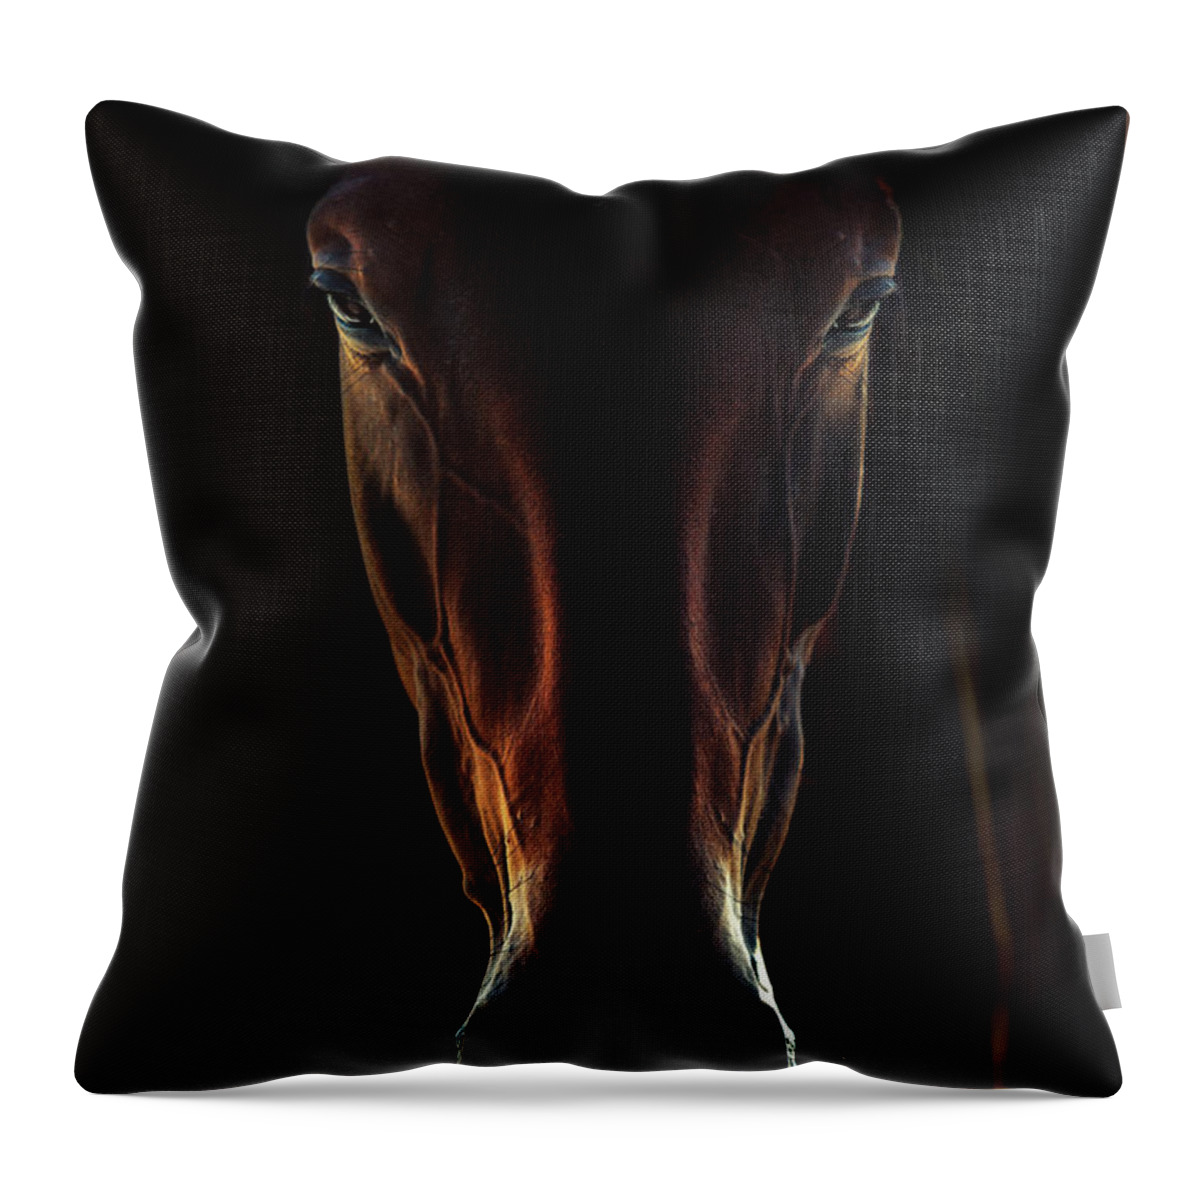 Horse Throw Pillow featuring the photograph Portrait Of A Brown Horse Close Up by Dimitar Hristov